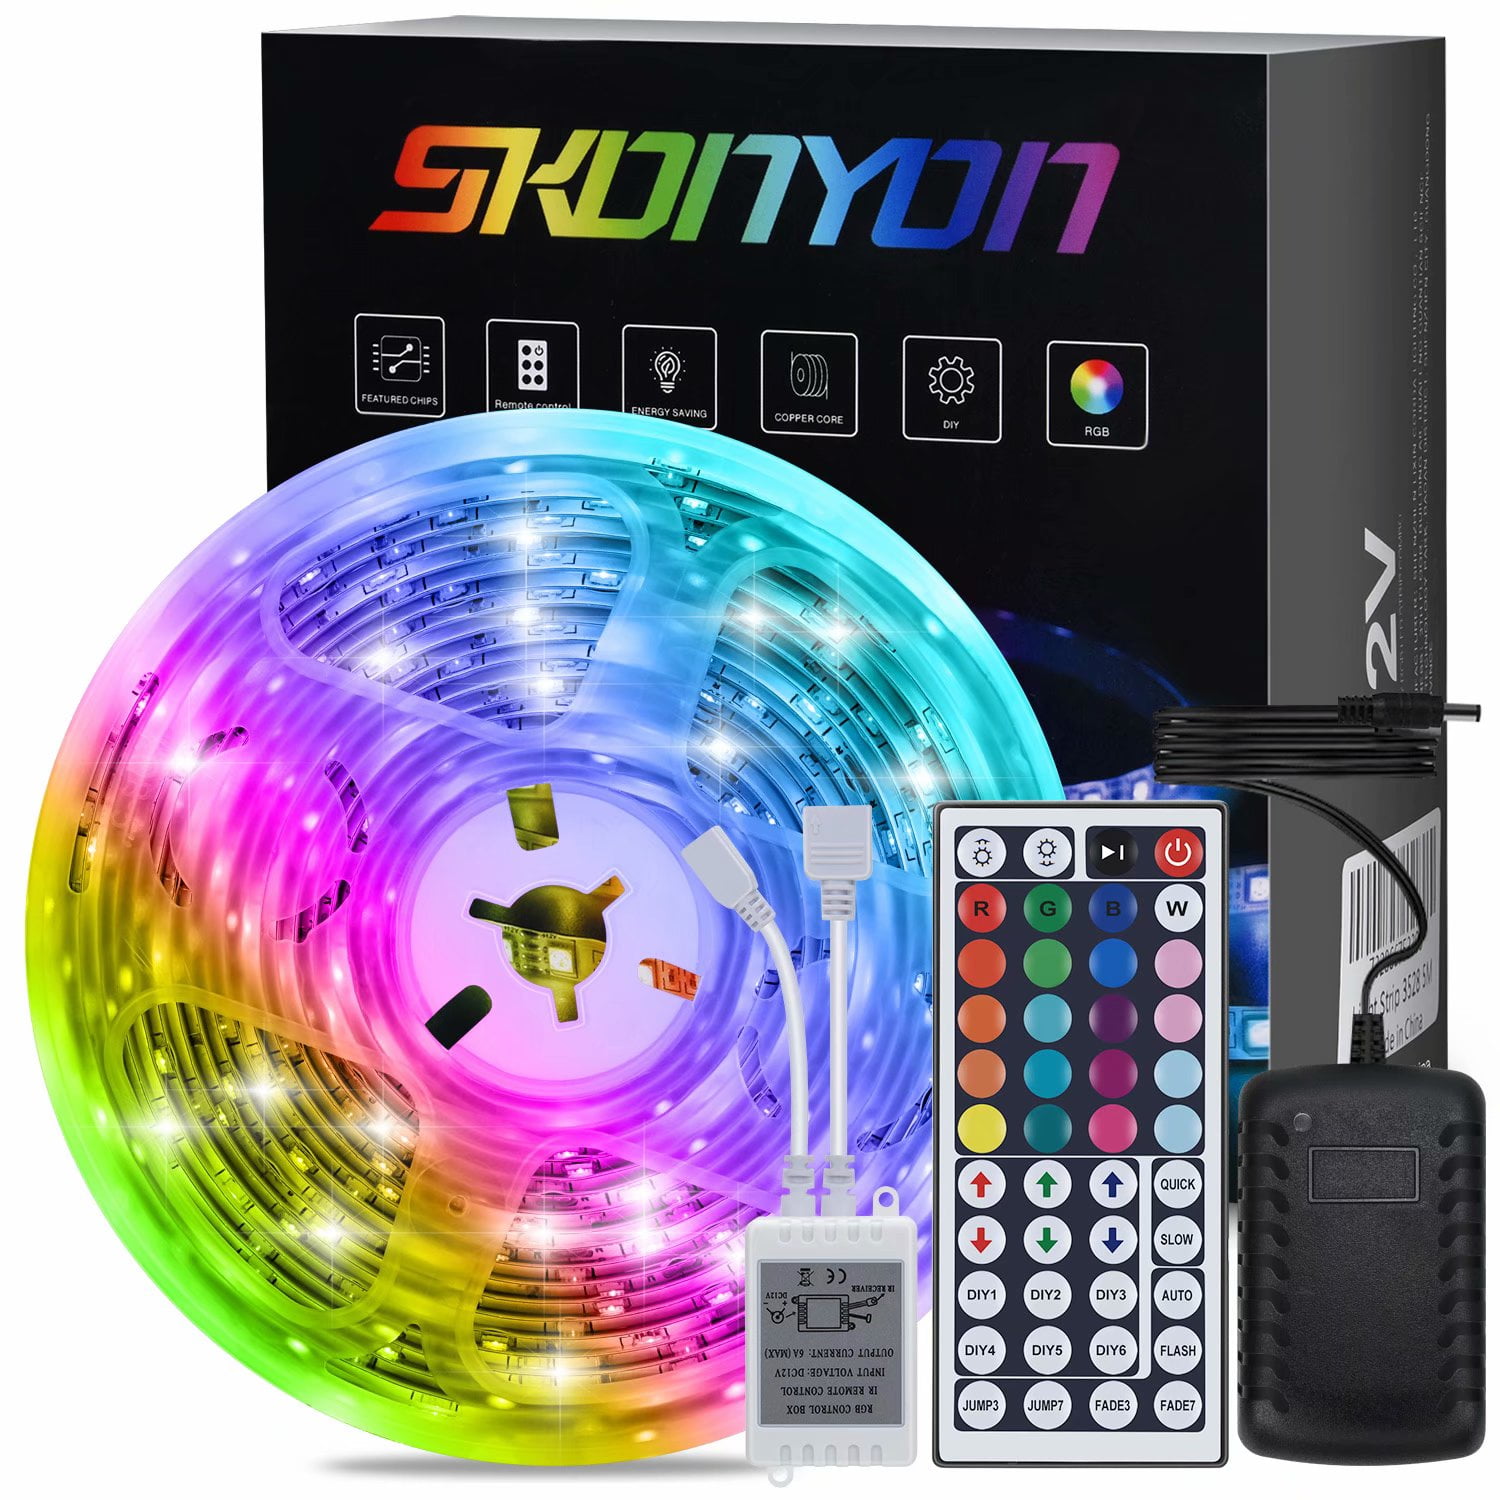 44 Key Infrared Remote Control for 3528 or 5050 LED Light Strips RGB 